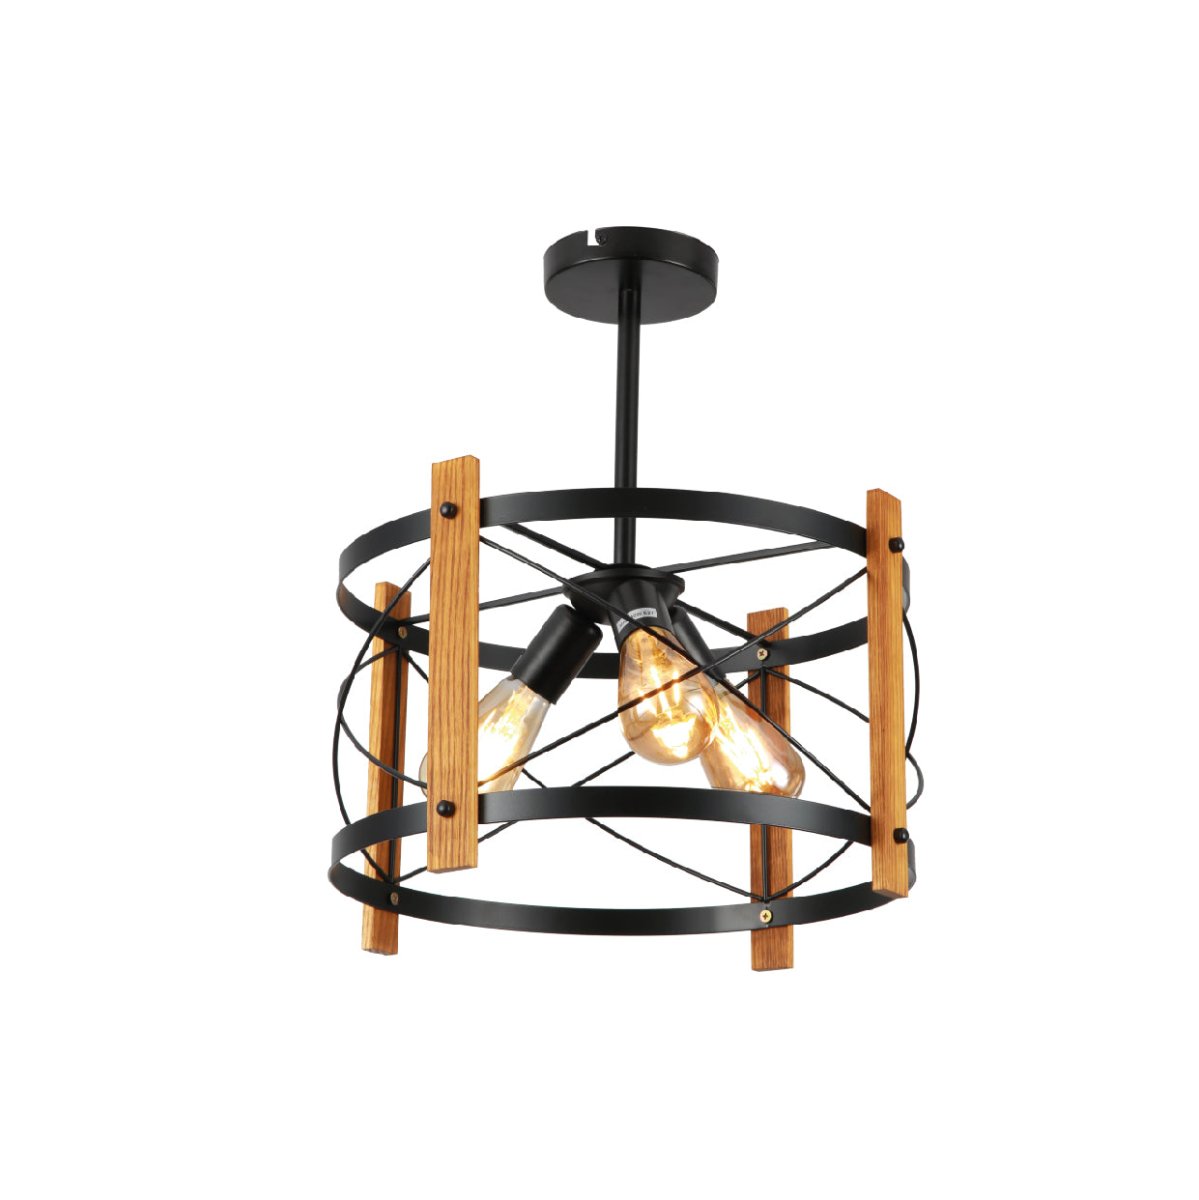 Main image of Caged Candle Industrial Retro Round Pendant Ceiling Light with 3xE27 Wood Black Finishing | TEKLED 159-17872